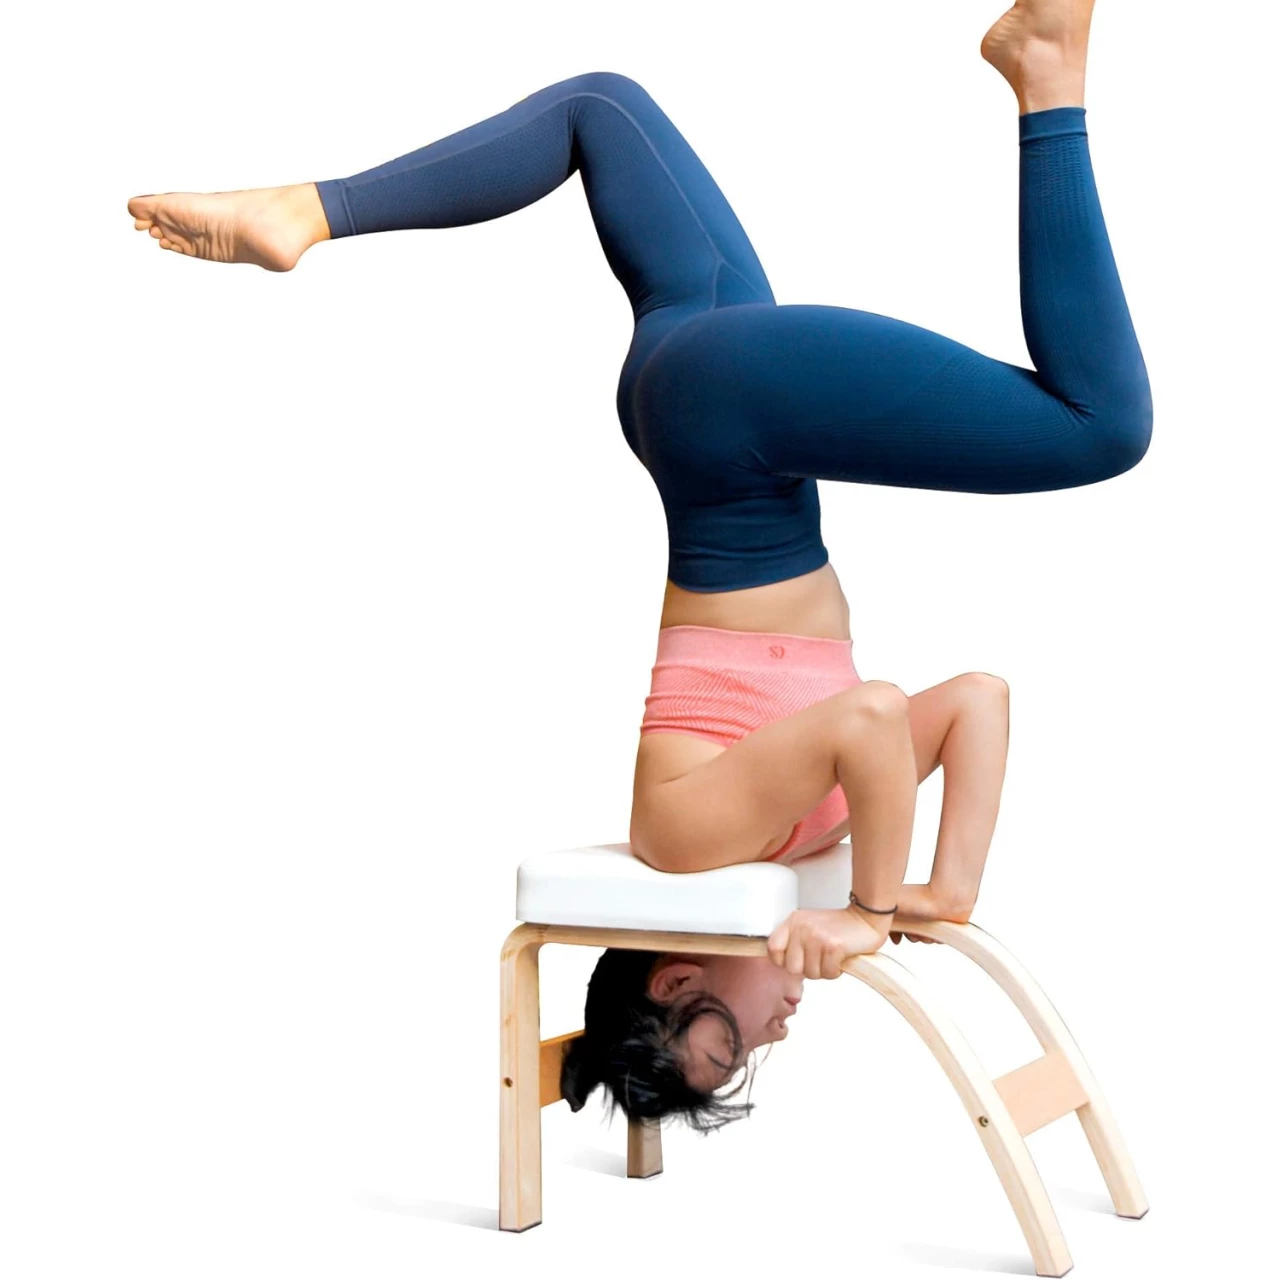 THUNDESK Yoga Inversion Bench Headstand Prop Upside Down Chair for Balance Training Core Strength Building Backbends Yoga Asana Practice Chair